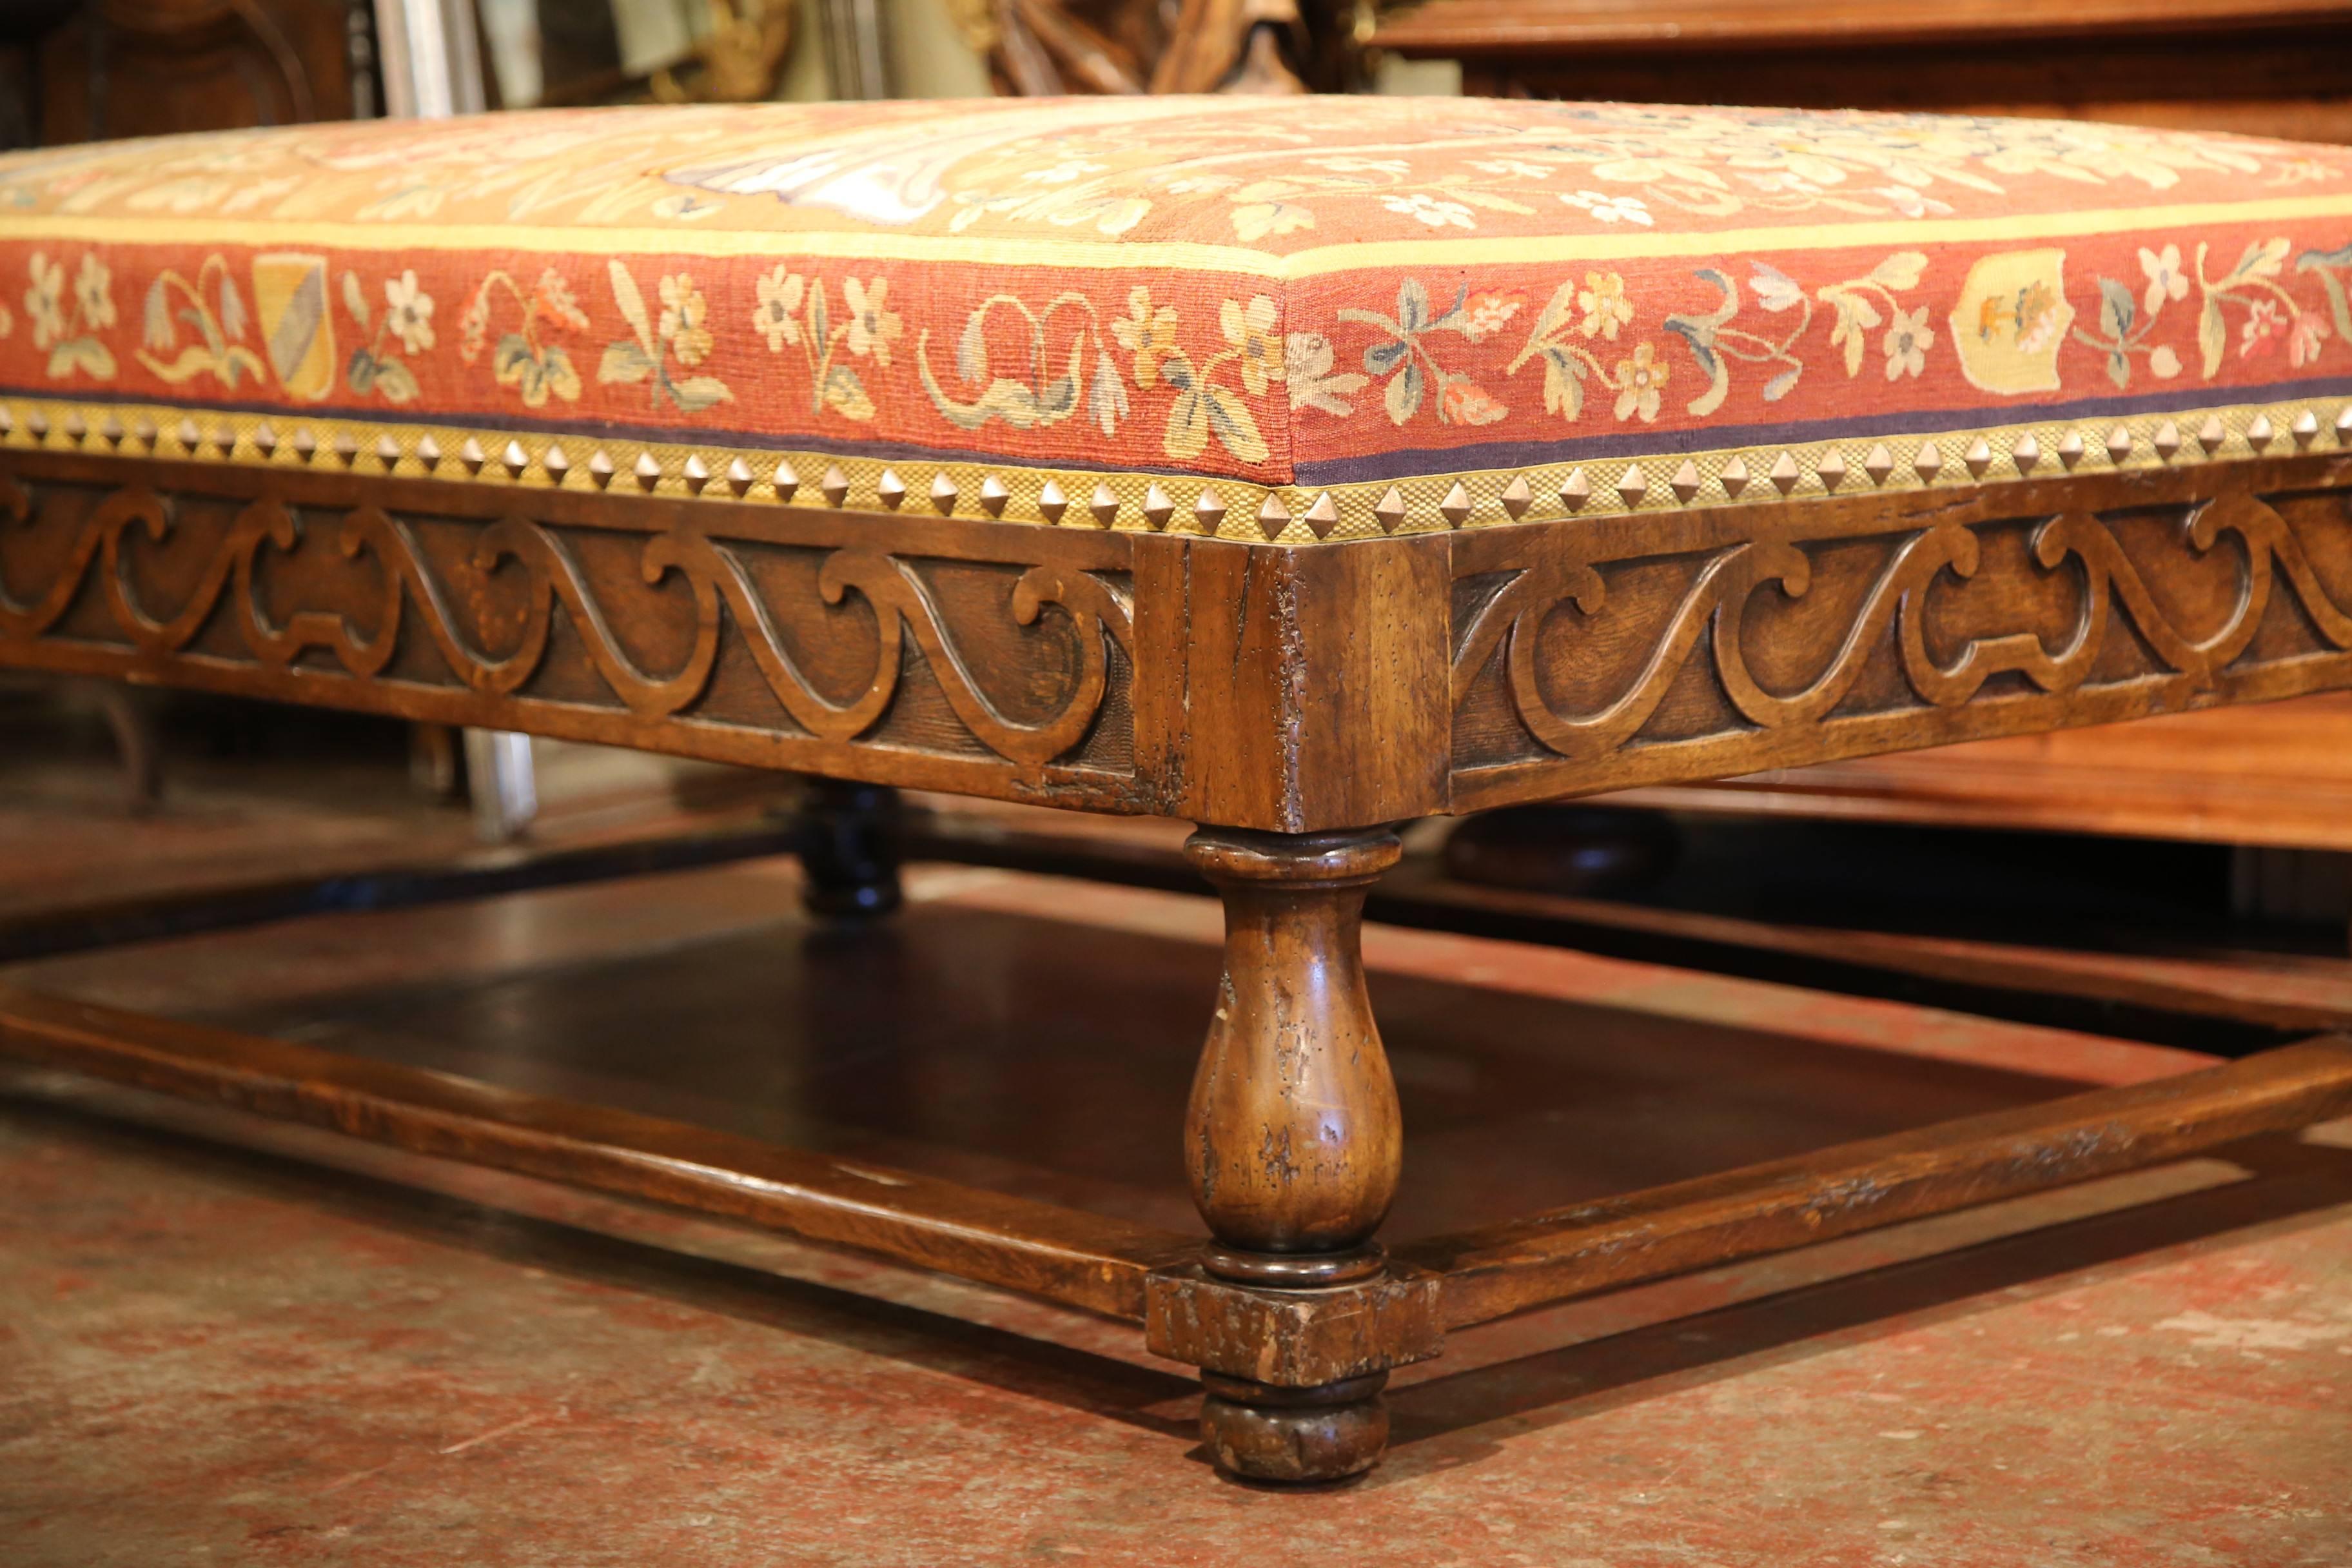 Hand-Carved Large, 19th Century French Carved Walnut Ottoman with Aubusson Tapestry